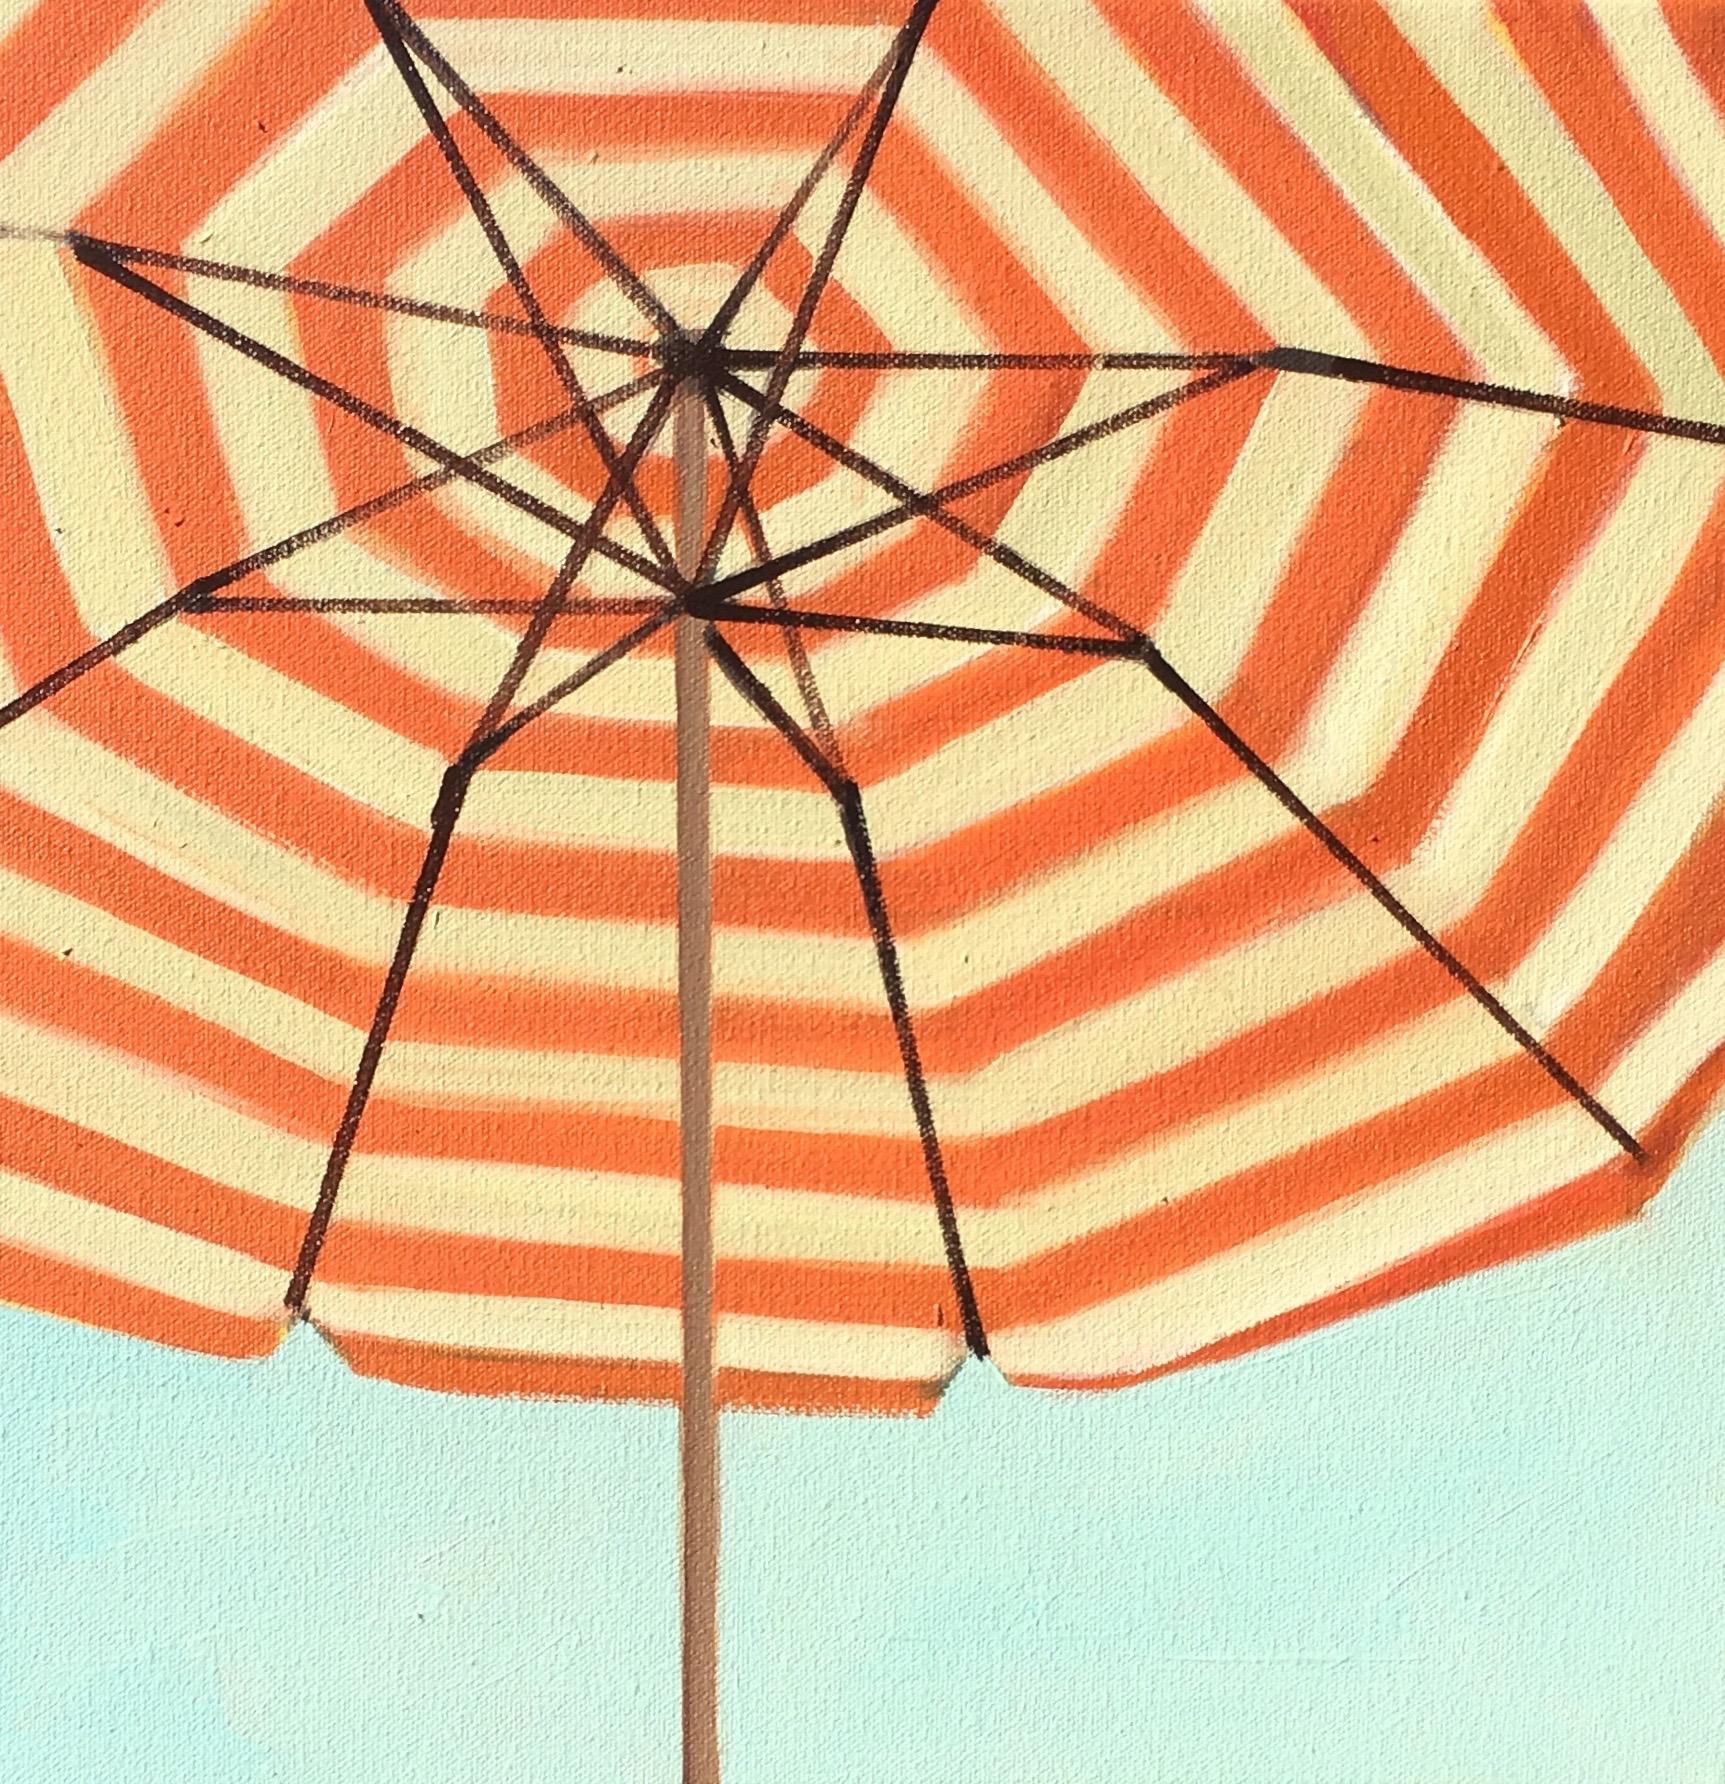 T.S. Harris Still-Life Painting - "Orange and White Striped Umbrella" close up oil painting 